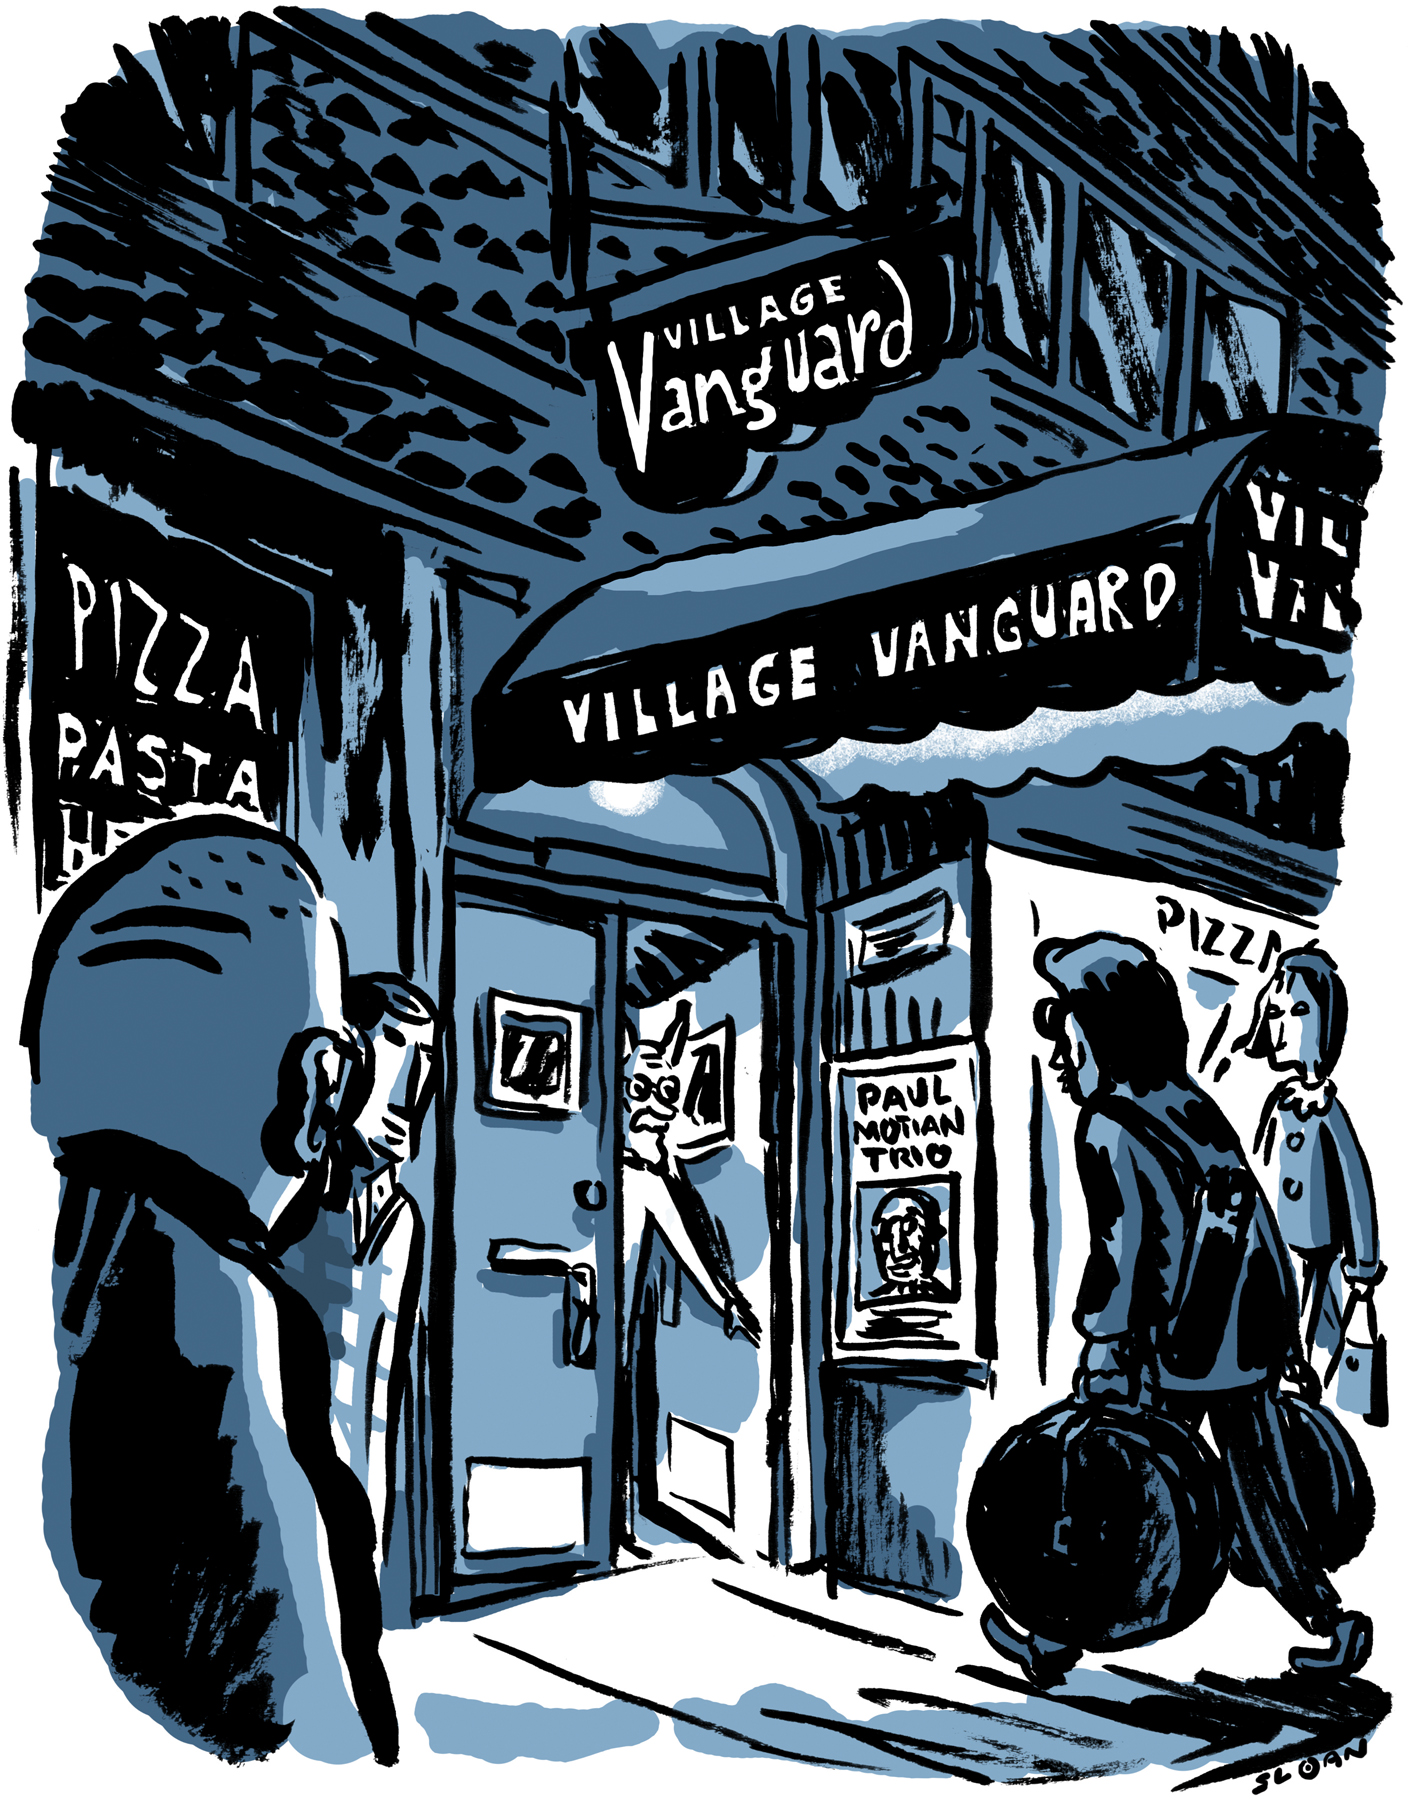 Paul Motian arriving at the Village Vanguard, NYC.